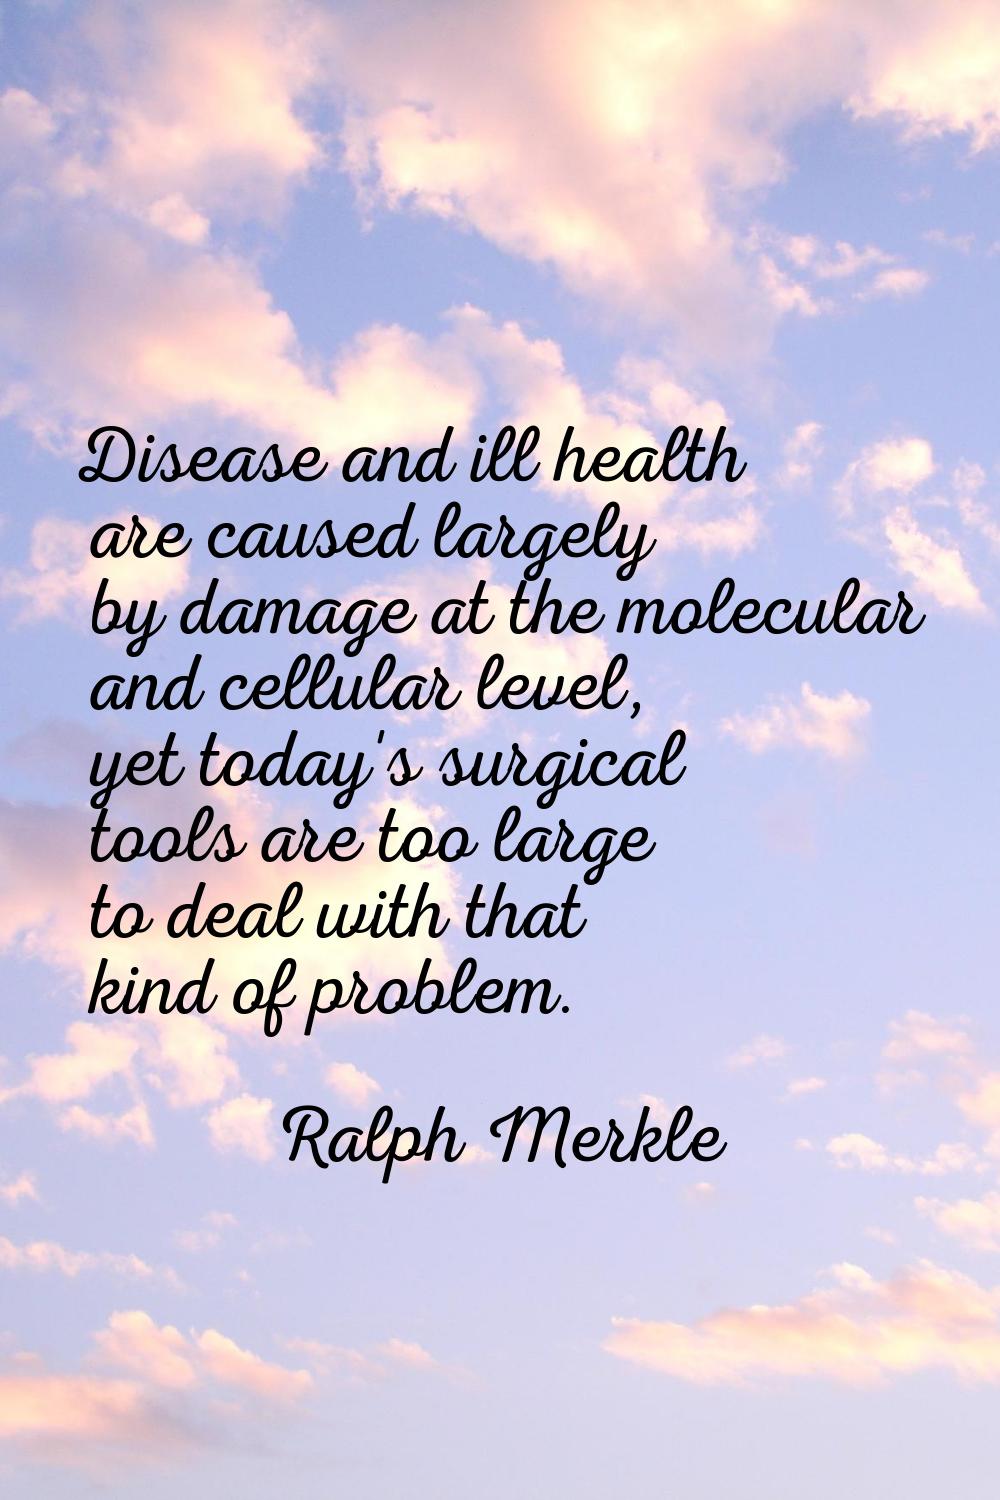 Disease and ill health are caused largely by damage at the molecular and cellular level, yet today'